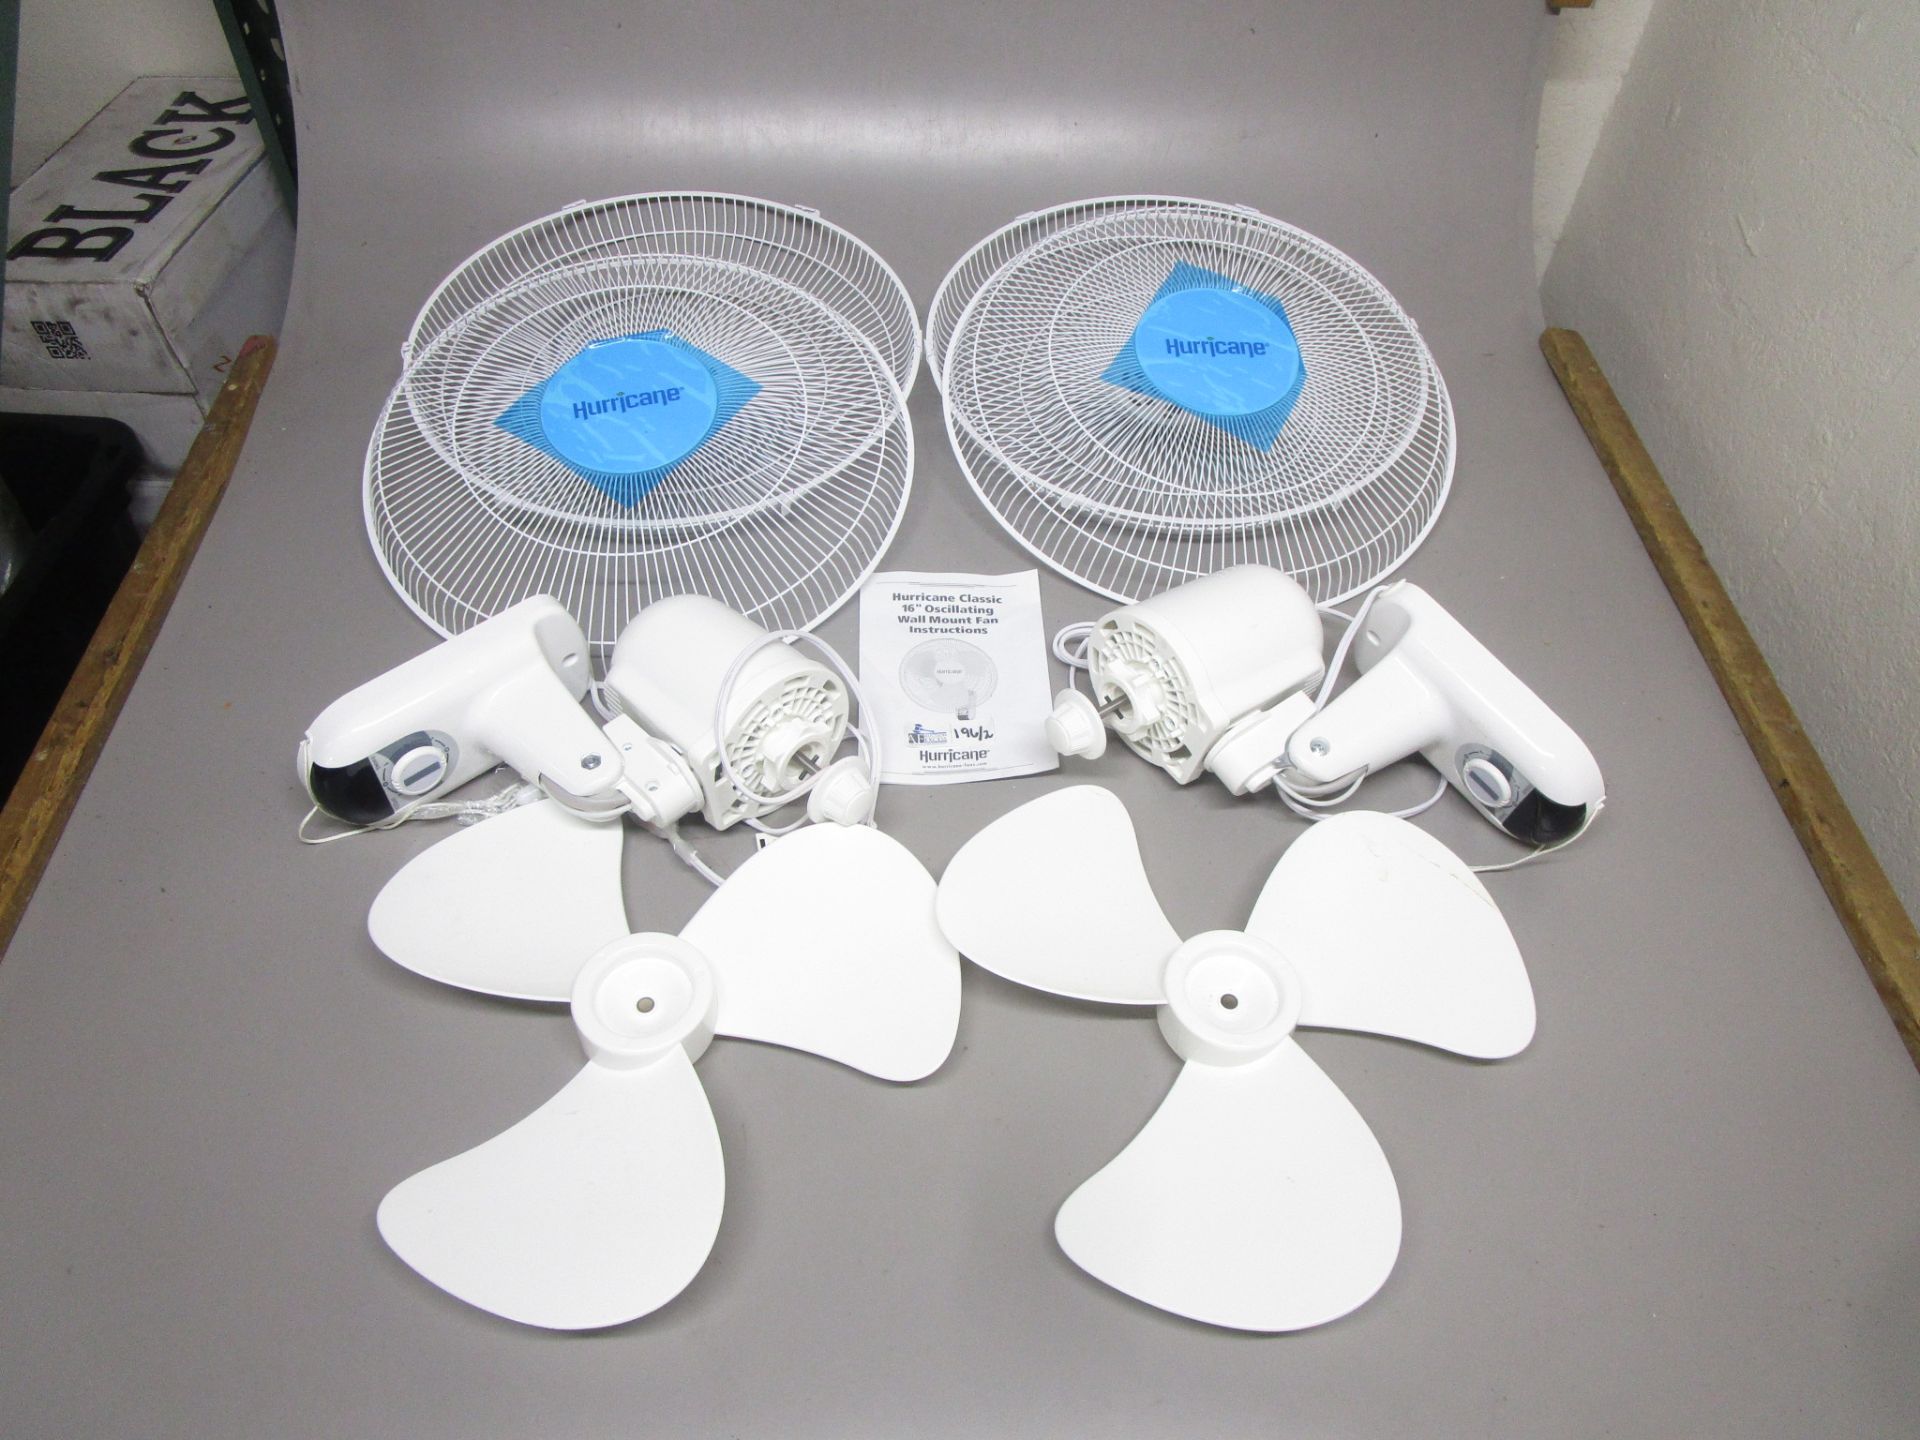 LOT OF 2 HURRICANE WALL FANS IN ORIGINAL BOXES - Image 3 of 4